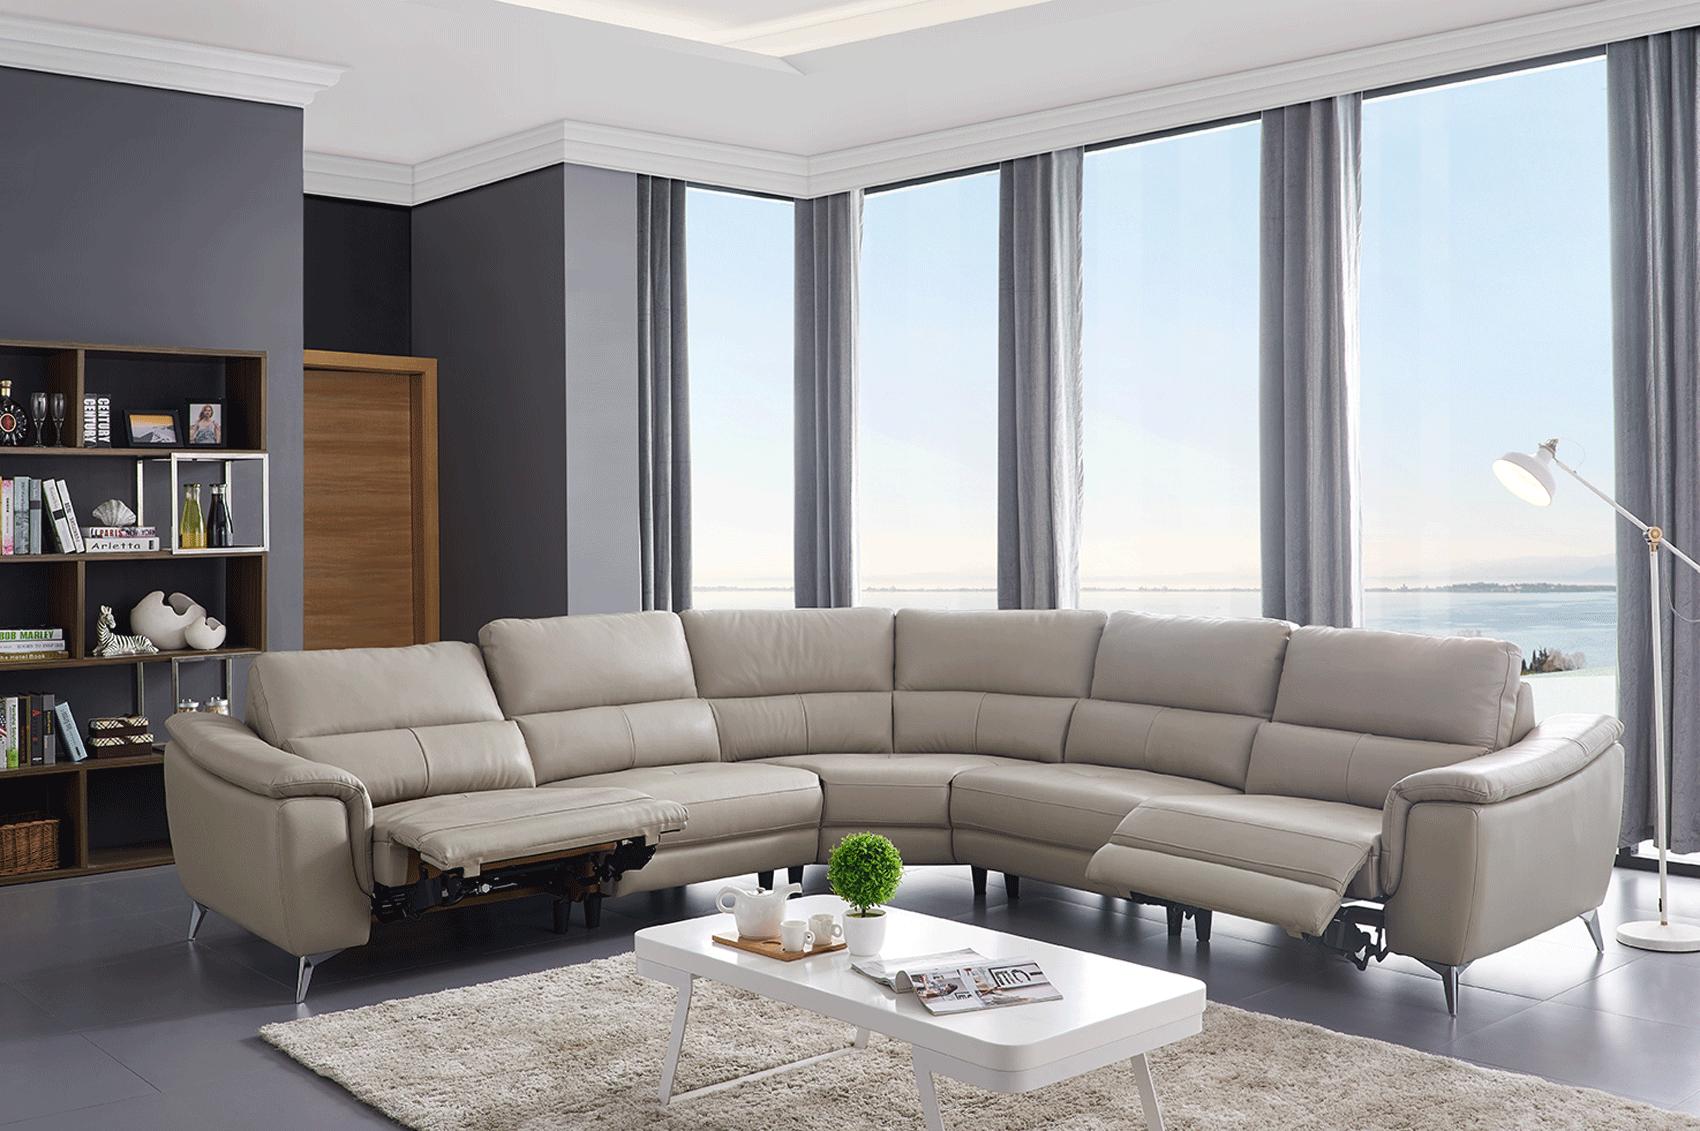 Contemporary, Modern Reclining Sectional 951 951SECTIONAL in Light Gray Top-grain Leather